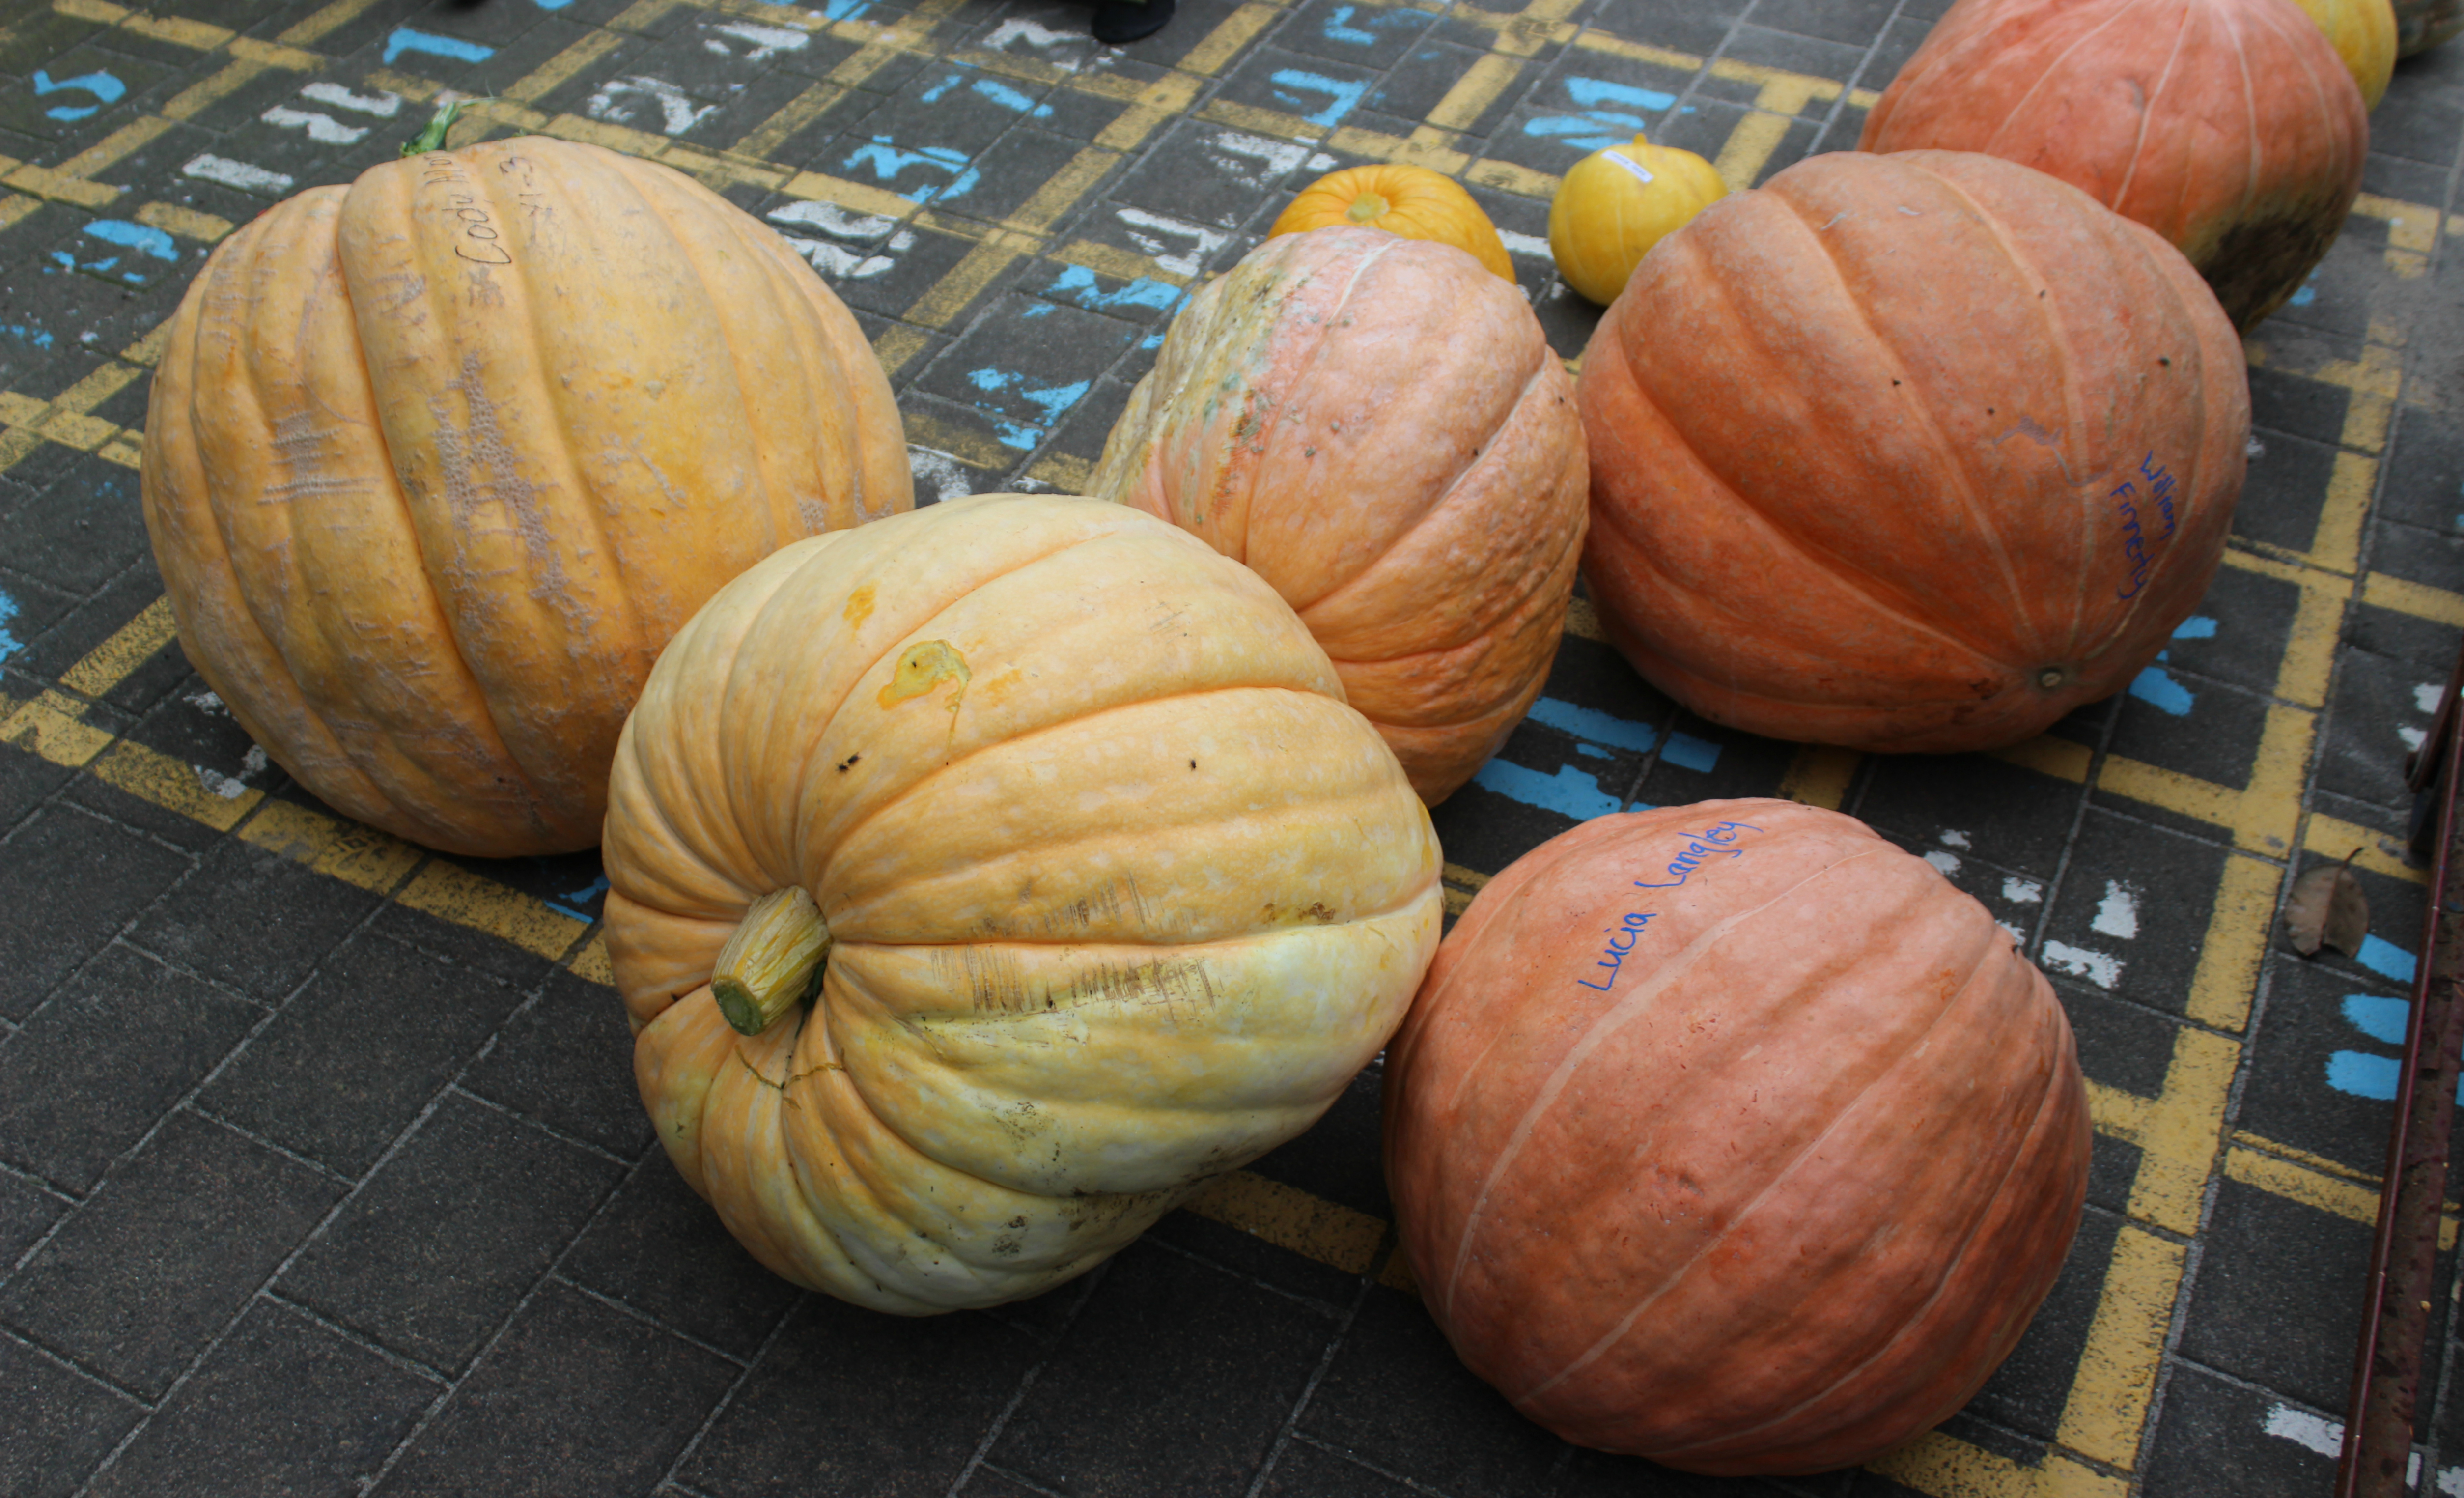 Pumpkin Wars: Some of the largest pumpkins grown by students up for judging at Tatuanui School. Photo: Jess Meek